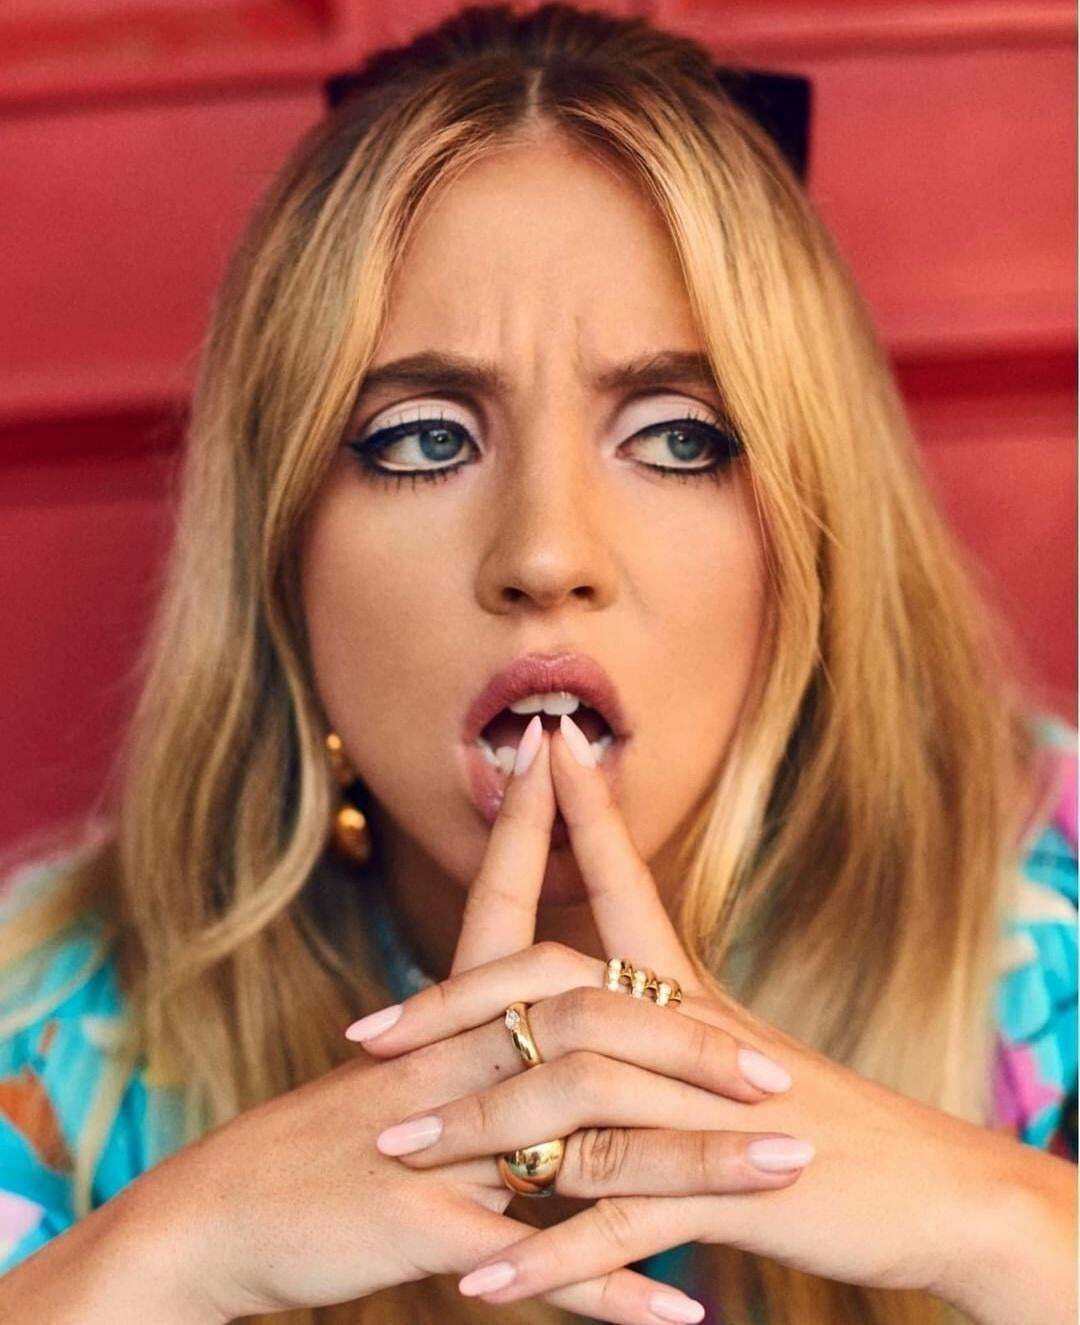 Sydney Sweeney looks pretty nervous after seeing your cock